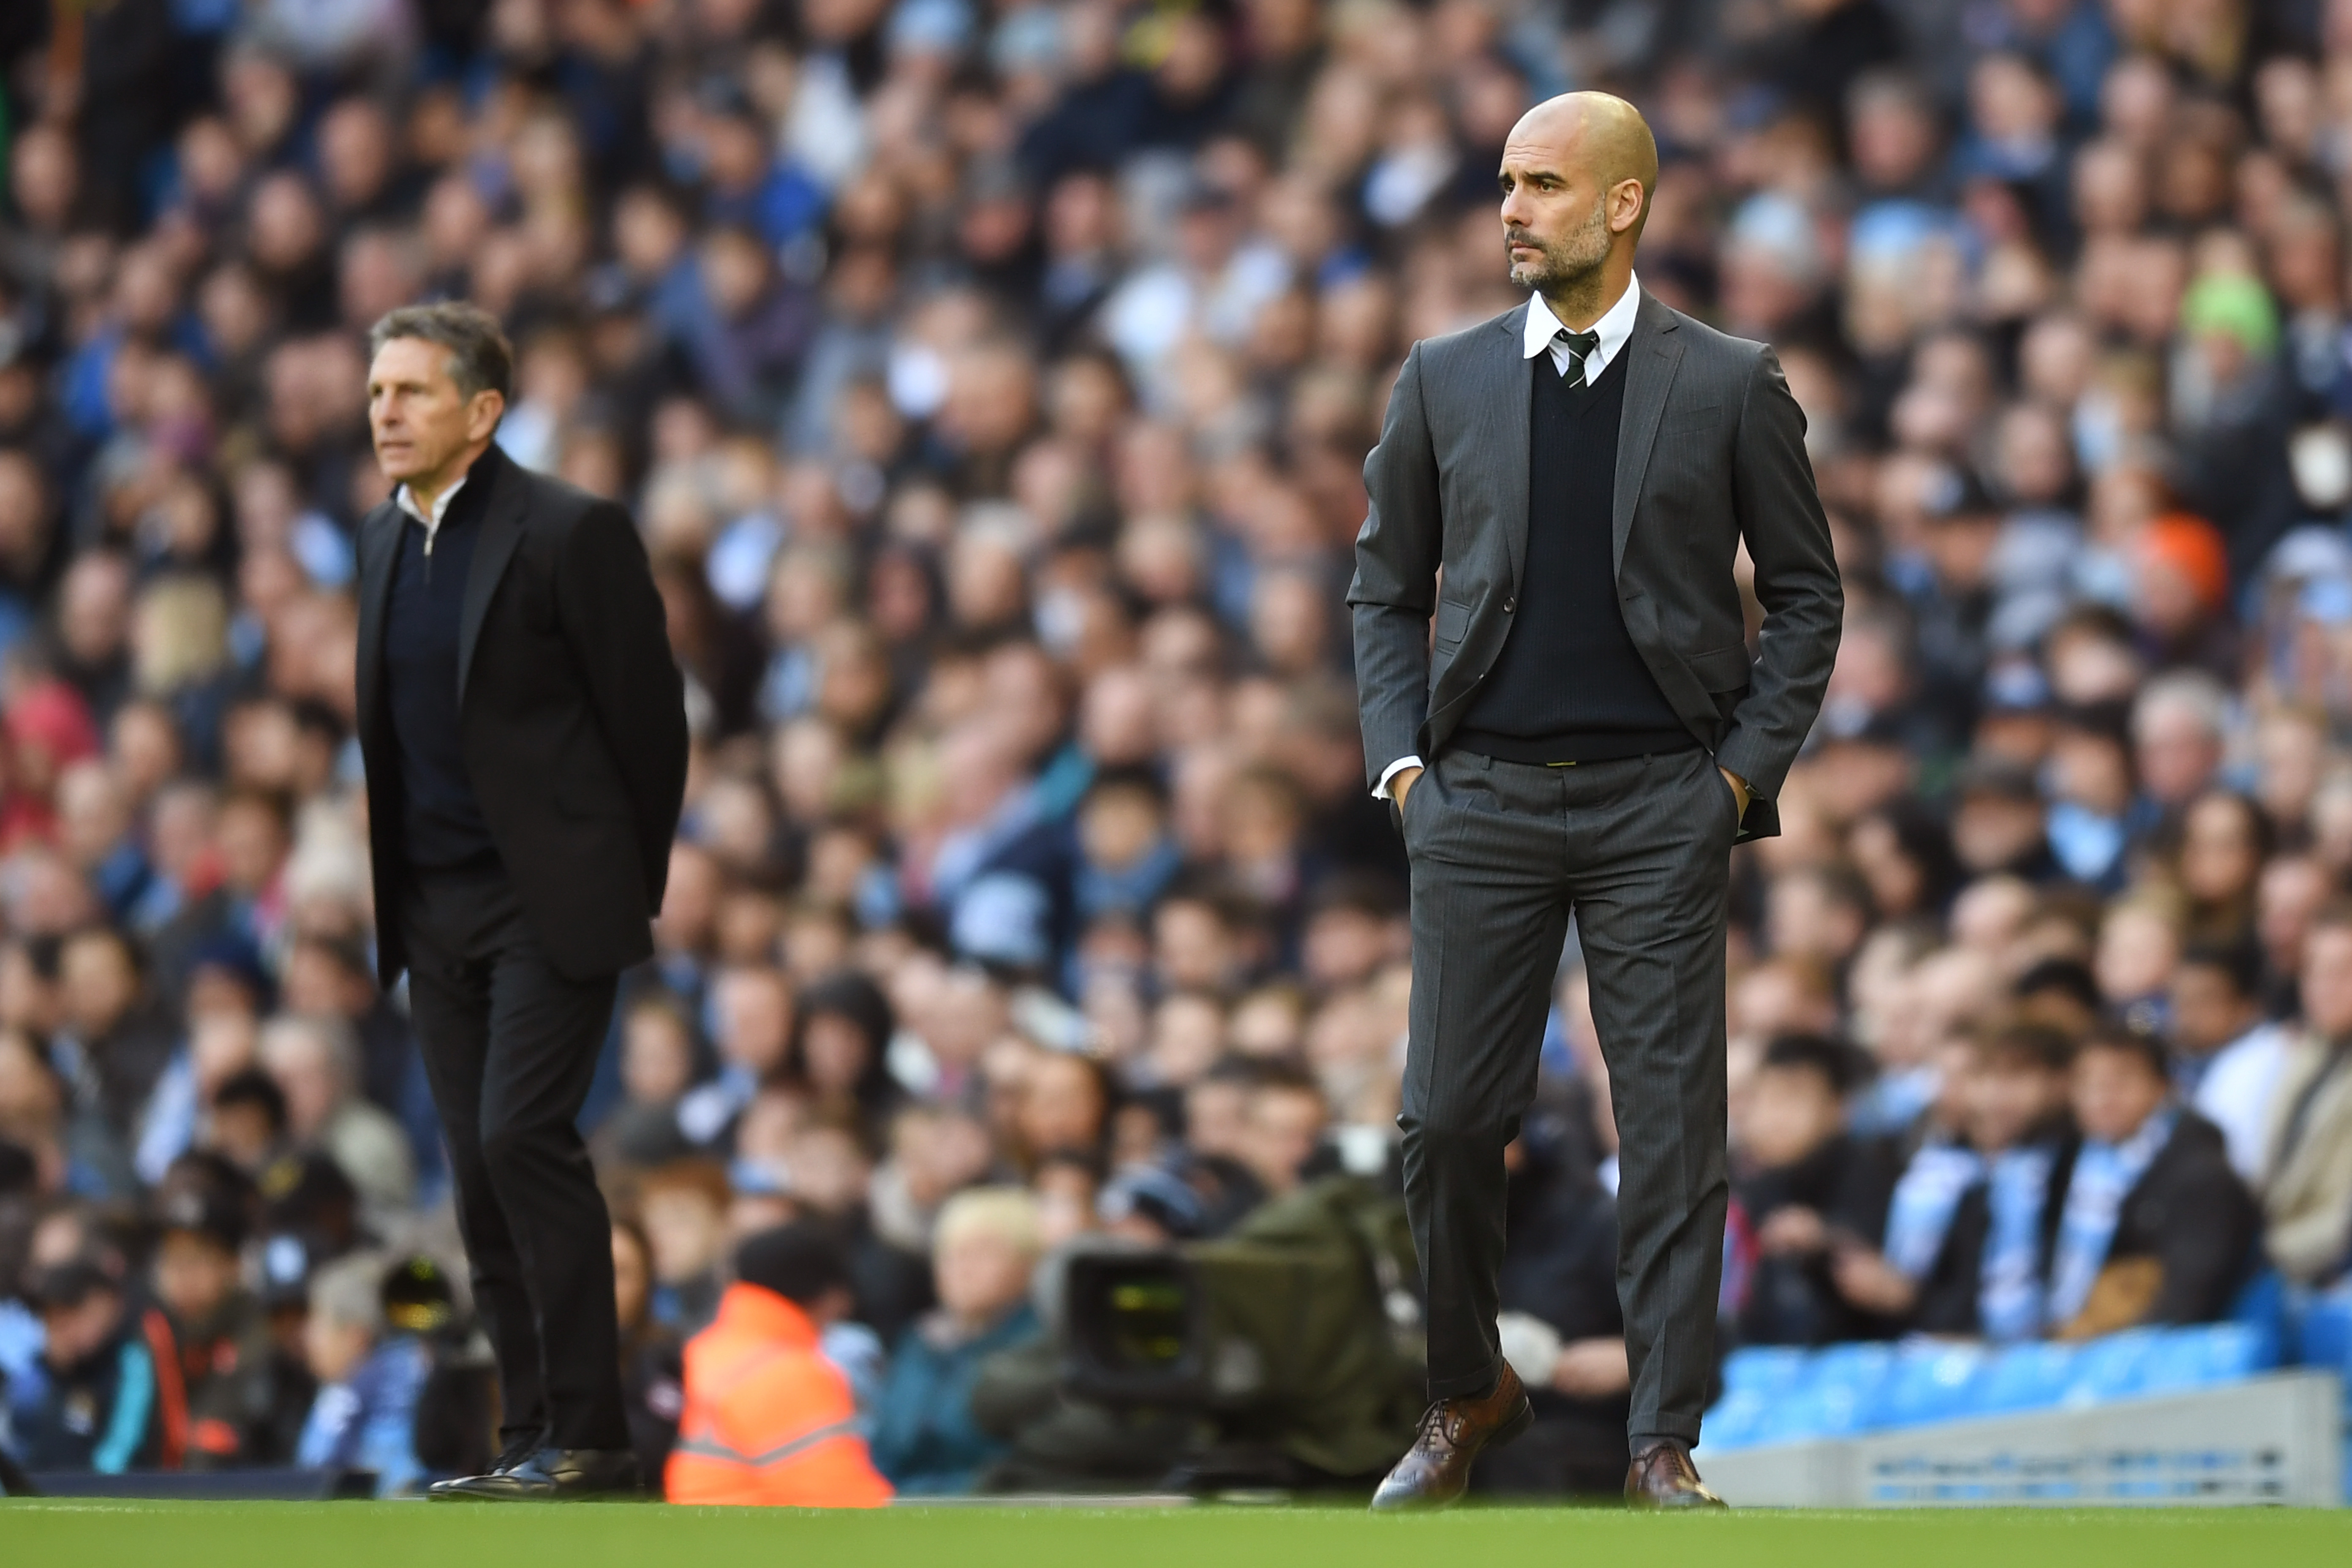 MANCHESTER, ENGLAND - OCTOBER 23:  Josep Guardiola, Manager of Manchester City (R) and Claude Puel, Manager of Southampton (L) look on during the Premier League match between Manchester City and Southampton at Etihad Stadium on October 23, 2016 in Manchester, England.  (Photo by Michael Regan/Getty Images)